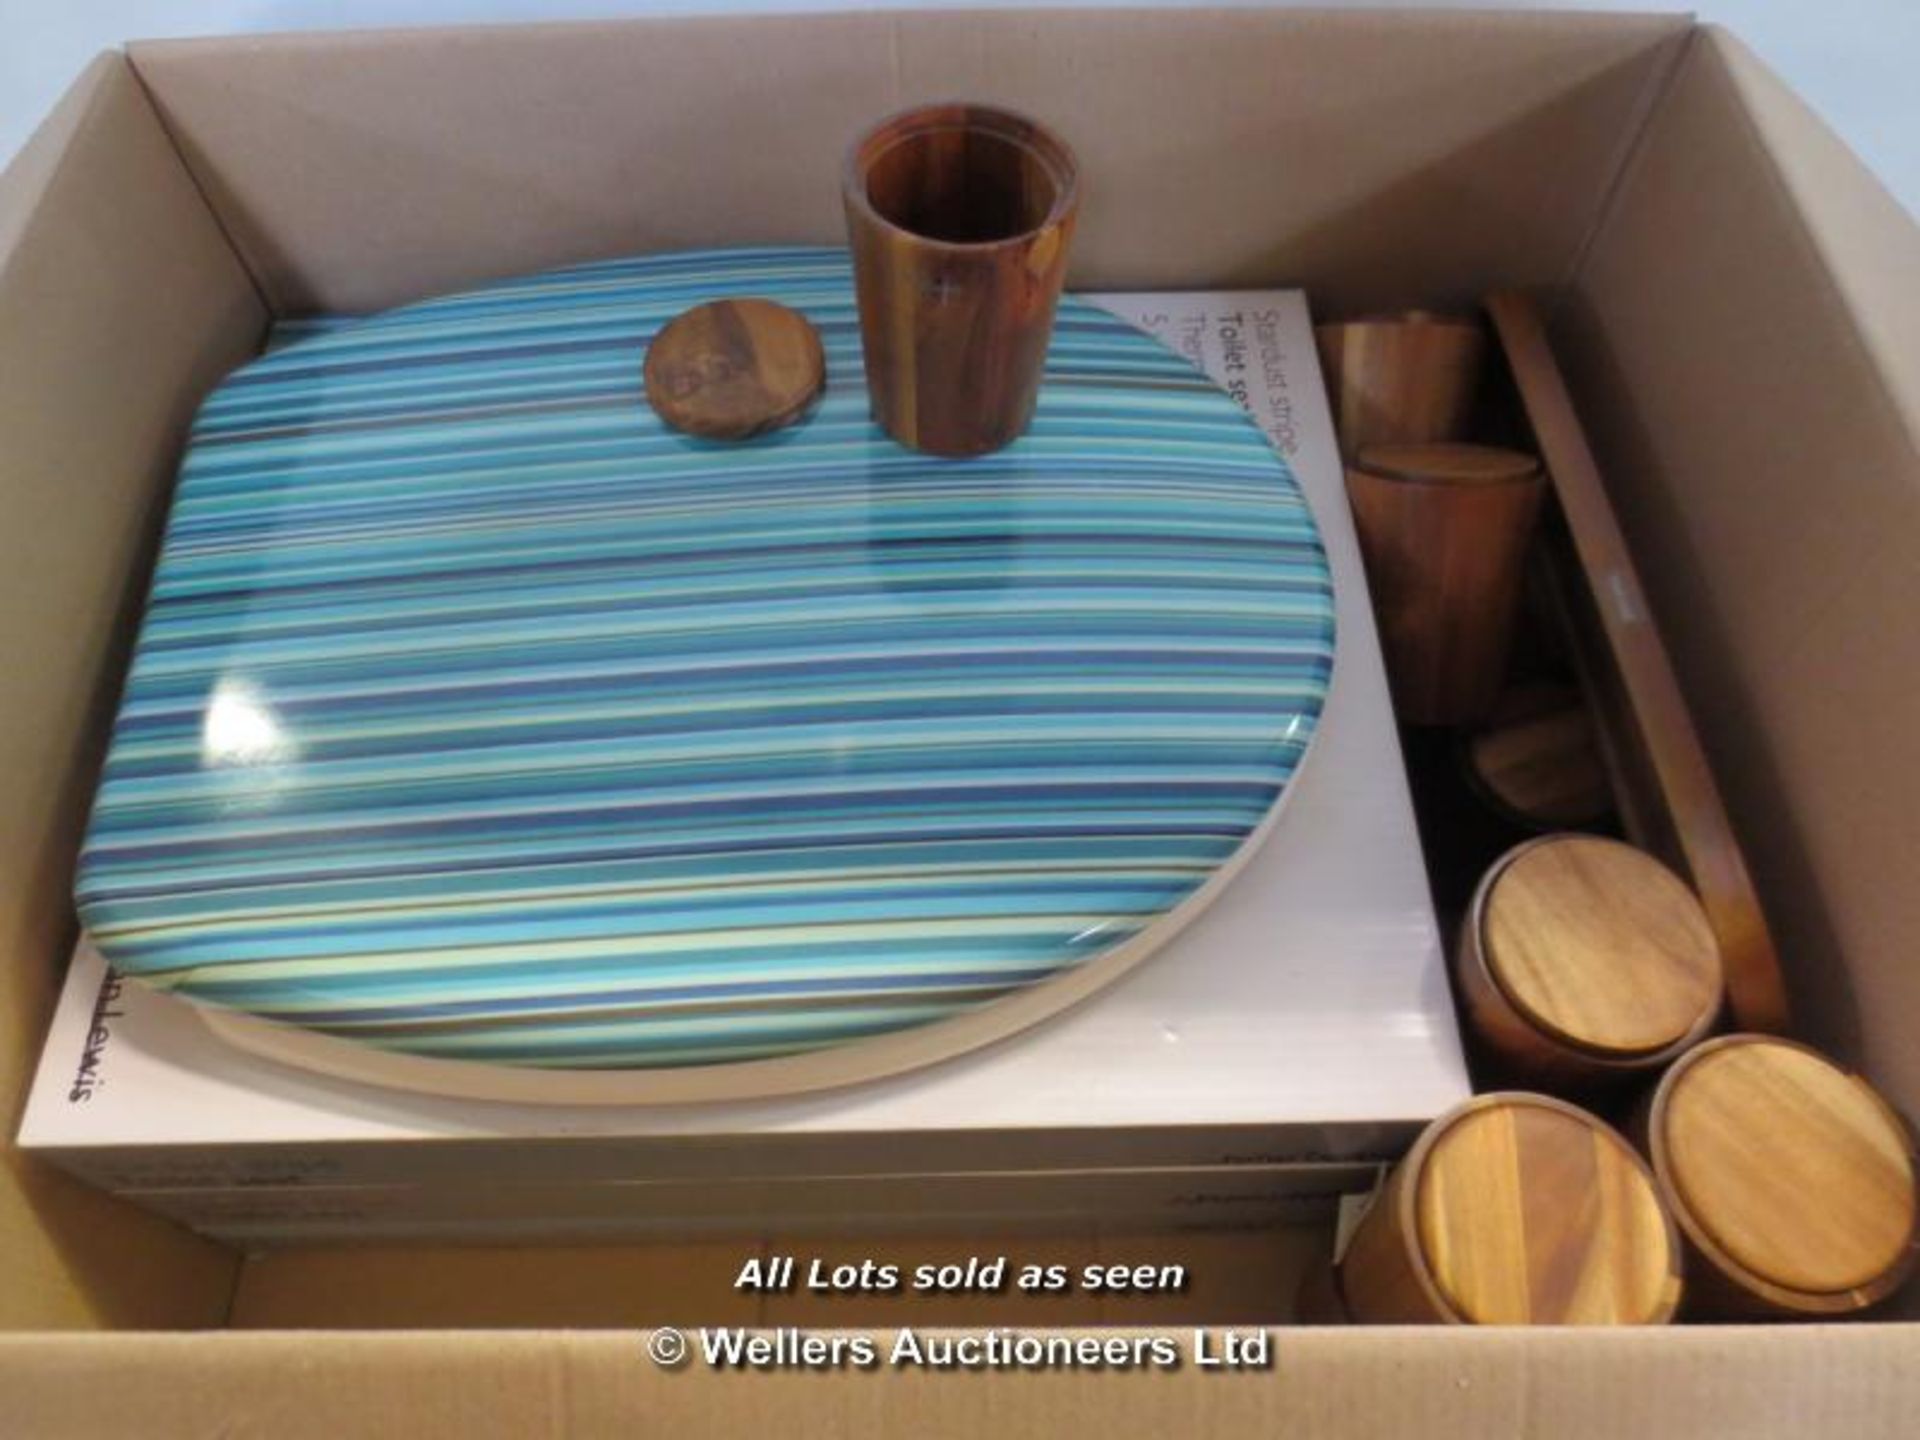 18X HOUSEHOLD ITEMS INC ACACIA TRAY & JARS & 4X STRIPED TOILET SEATS / GRADE: BRAND NEW / UNBOXED (